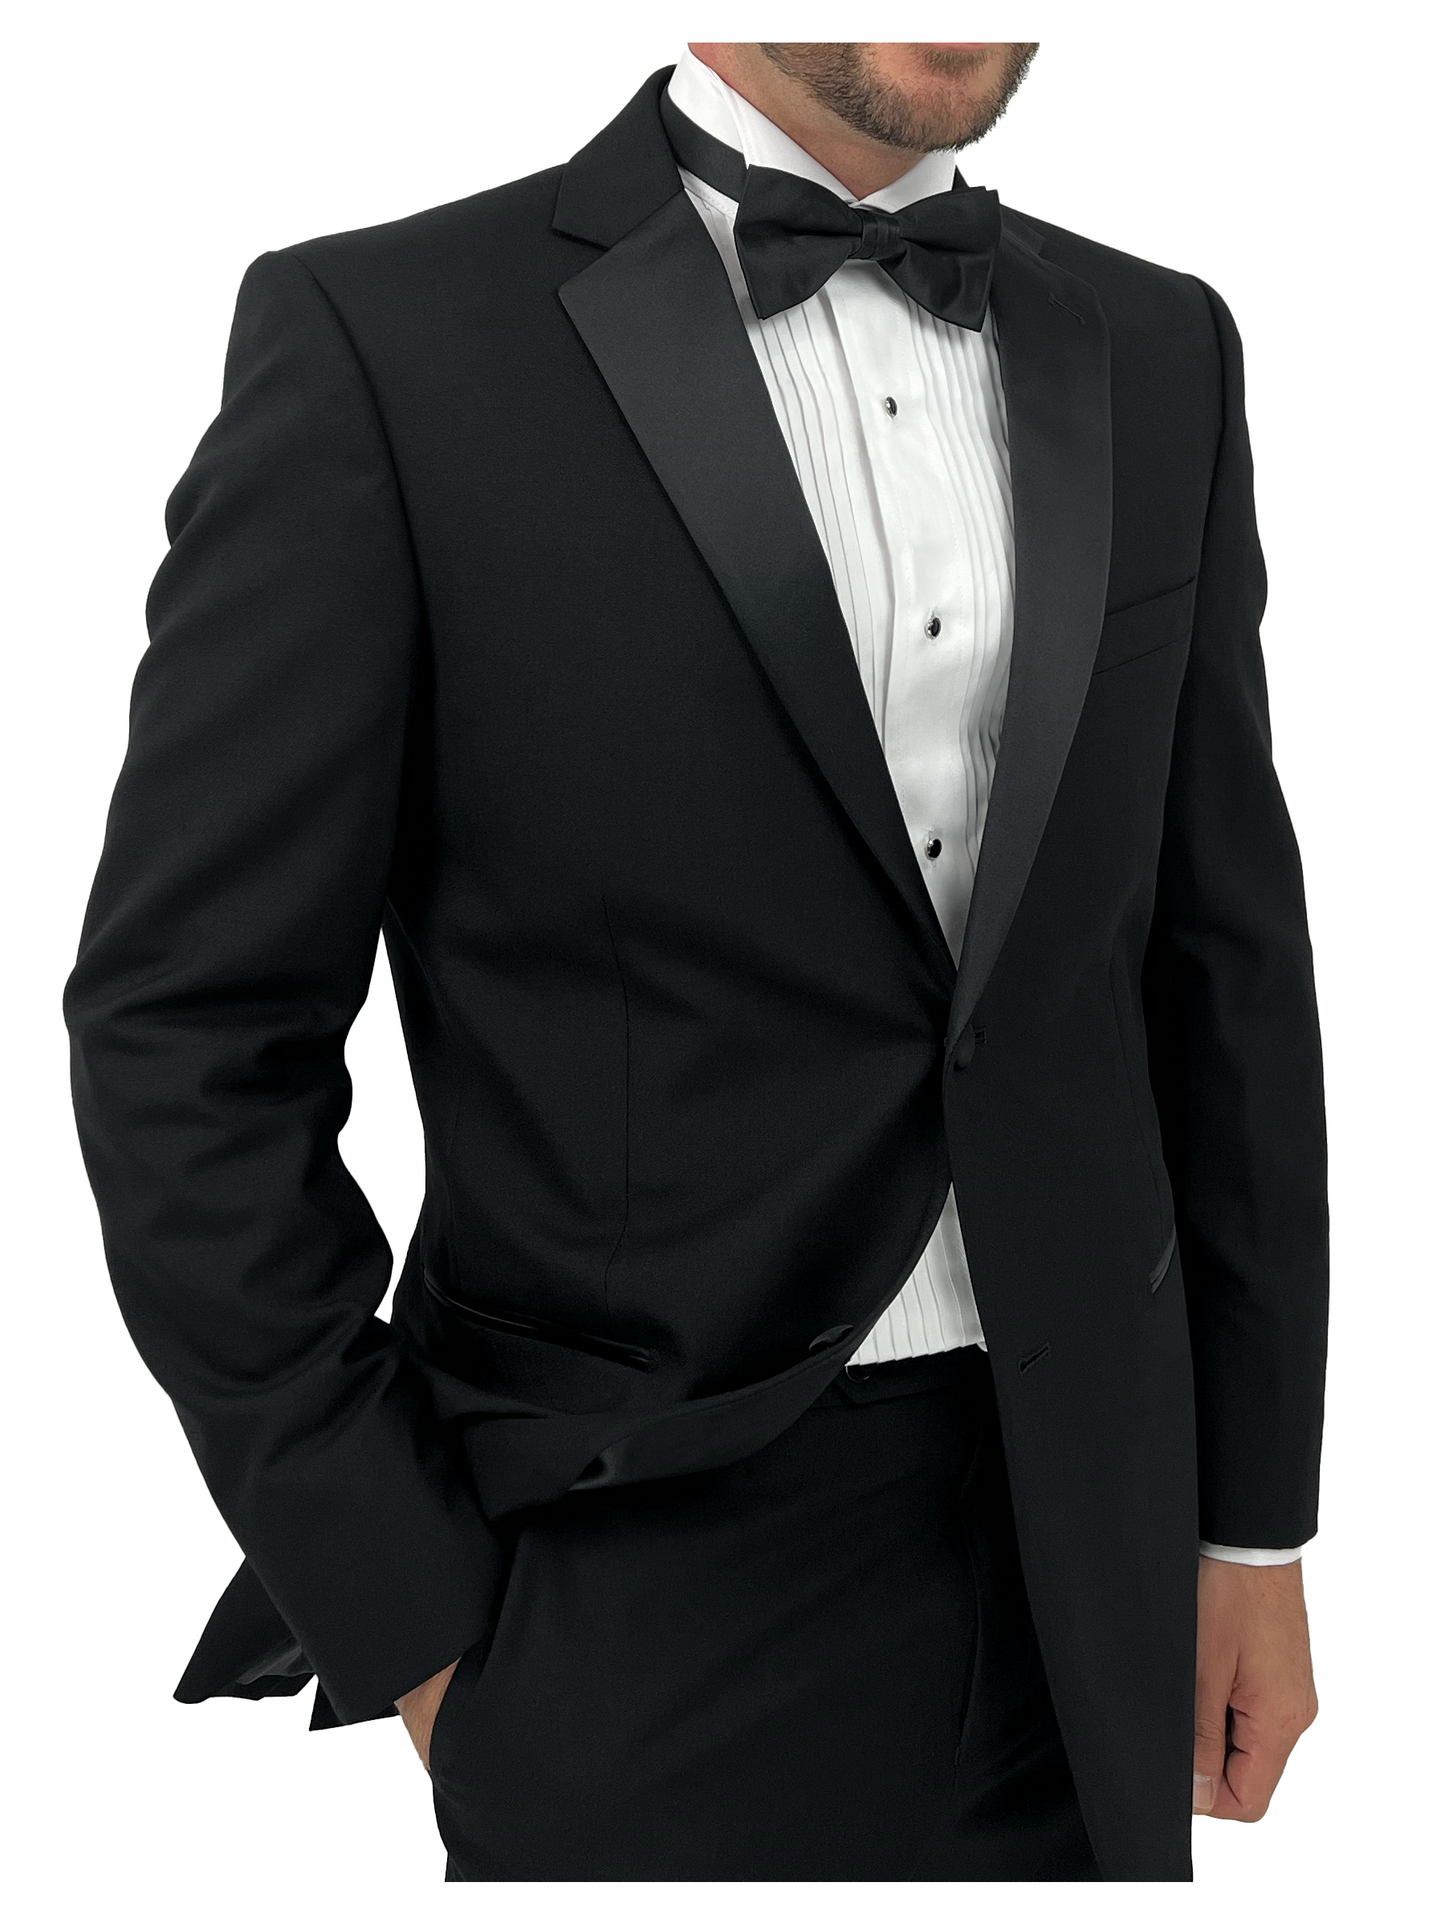 Sir Gregory Men's Regular Fit Tuxedo Shirt 100% Cotton Wing Collar French Cuff 1/4 Inch Pleat